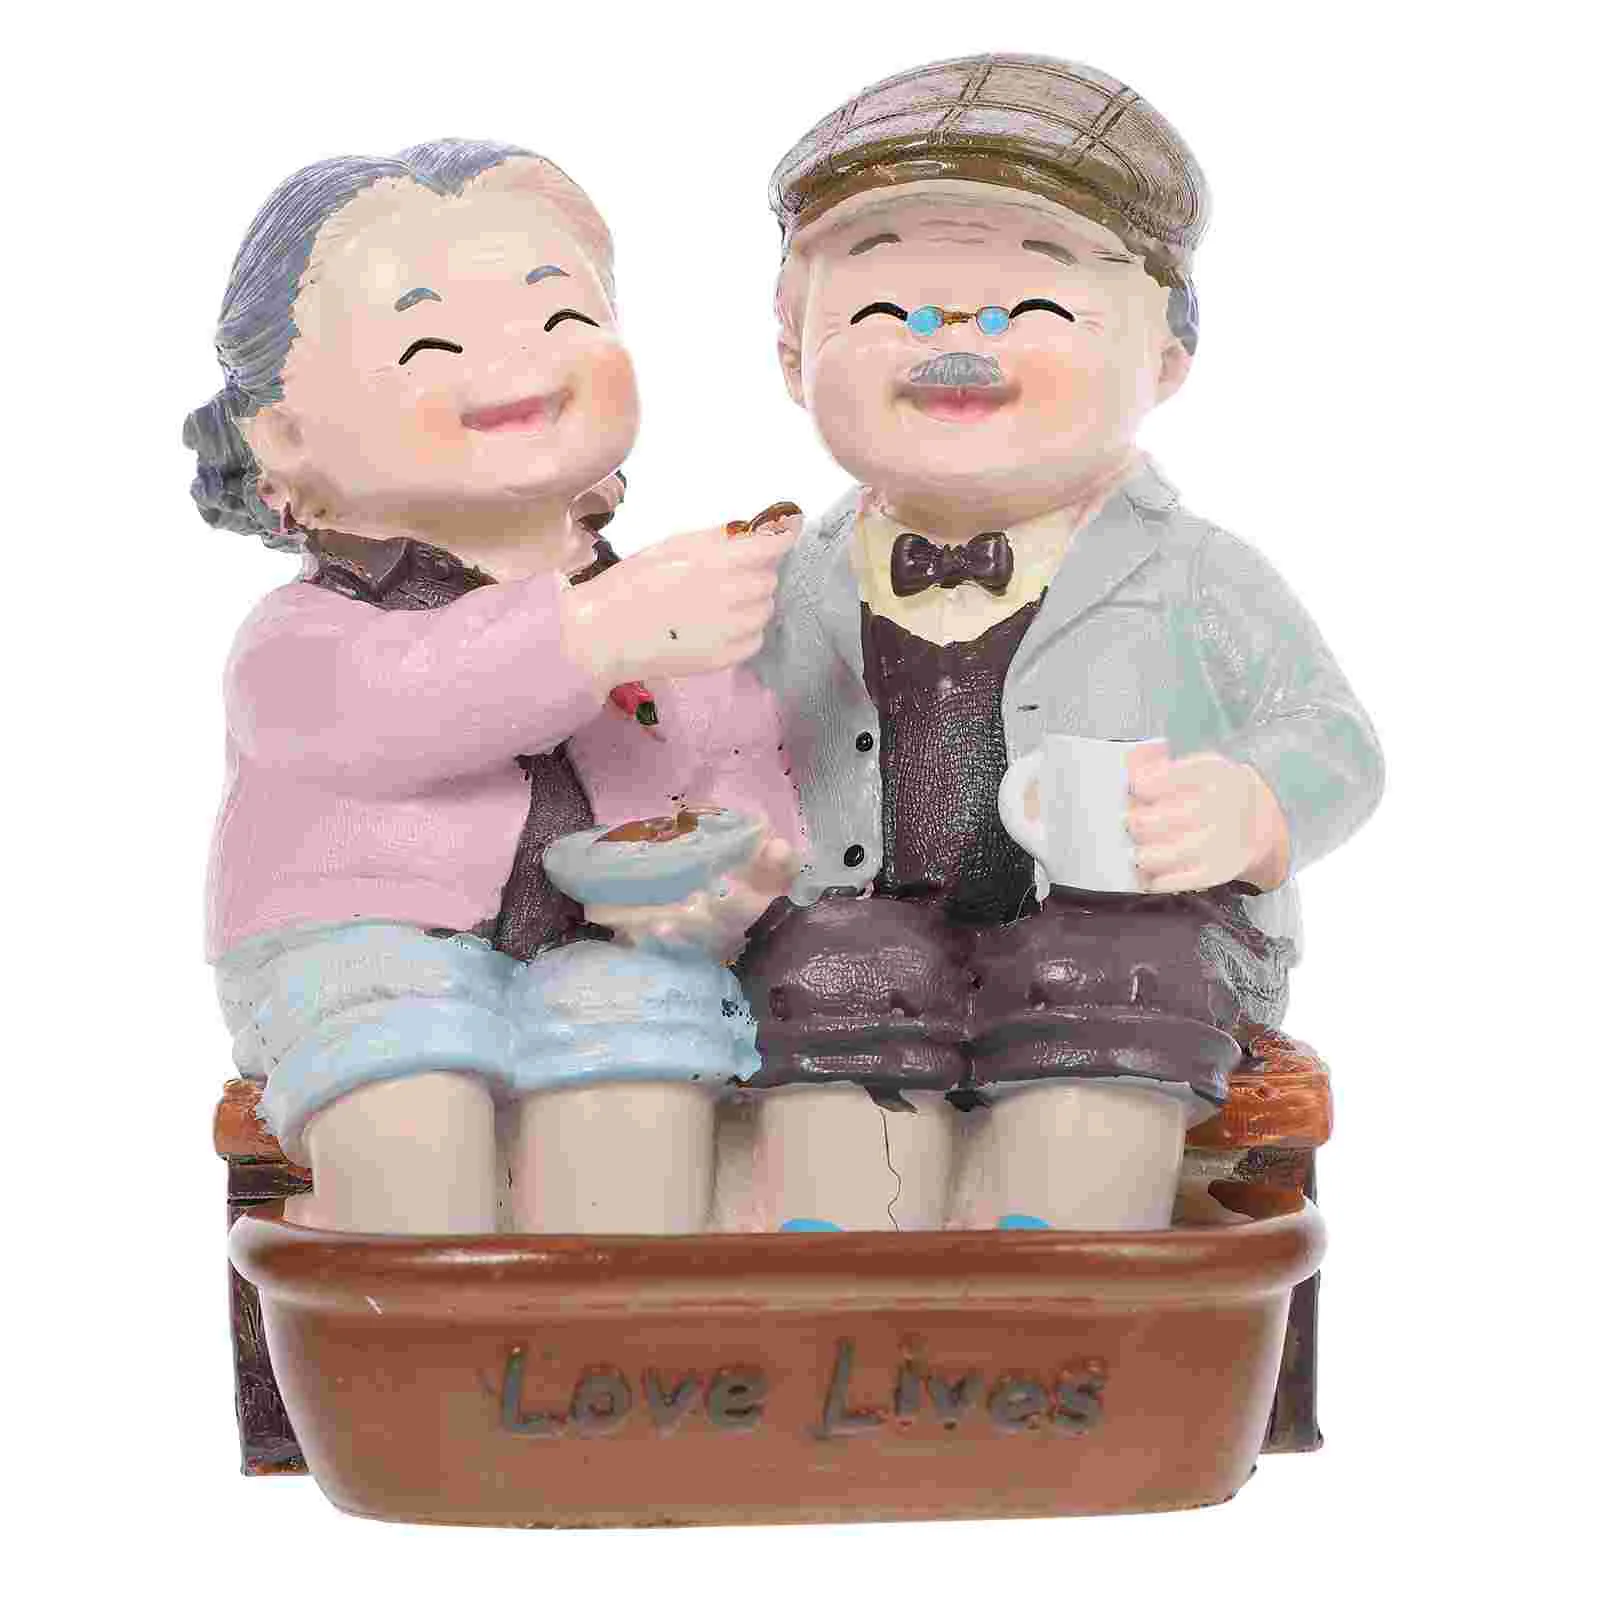 

Couple Cake Statue Figurines Grandparents Anniversary Elderly Figurine Topper Wedding Ornament Old Birthday Parents Loving Gifts